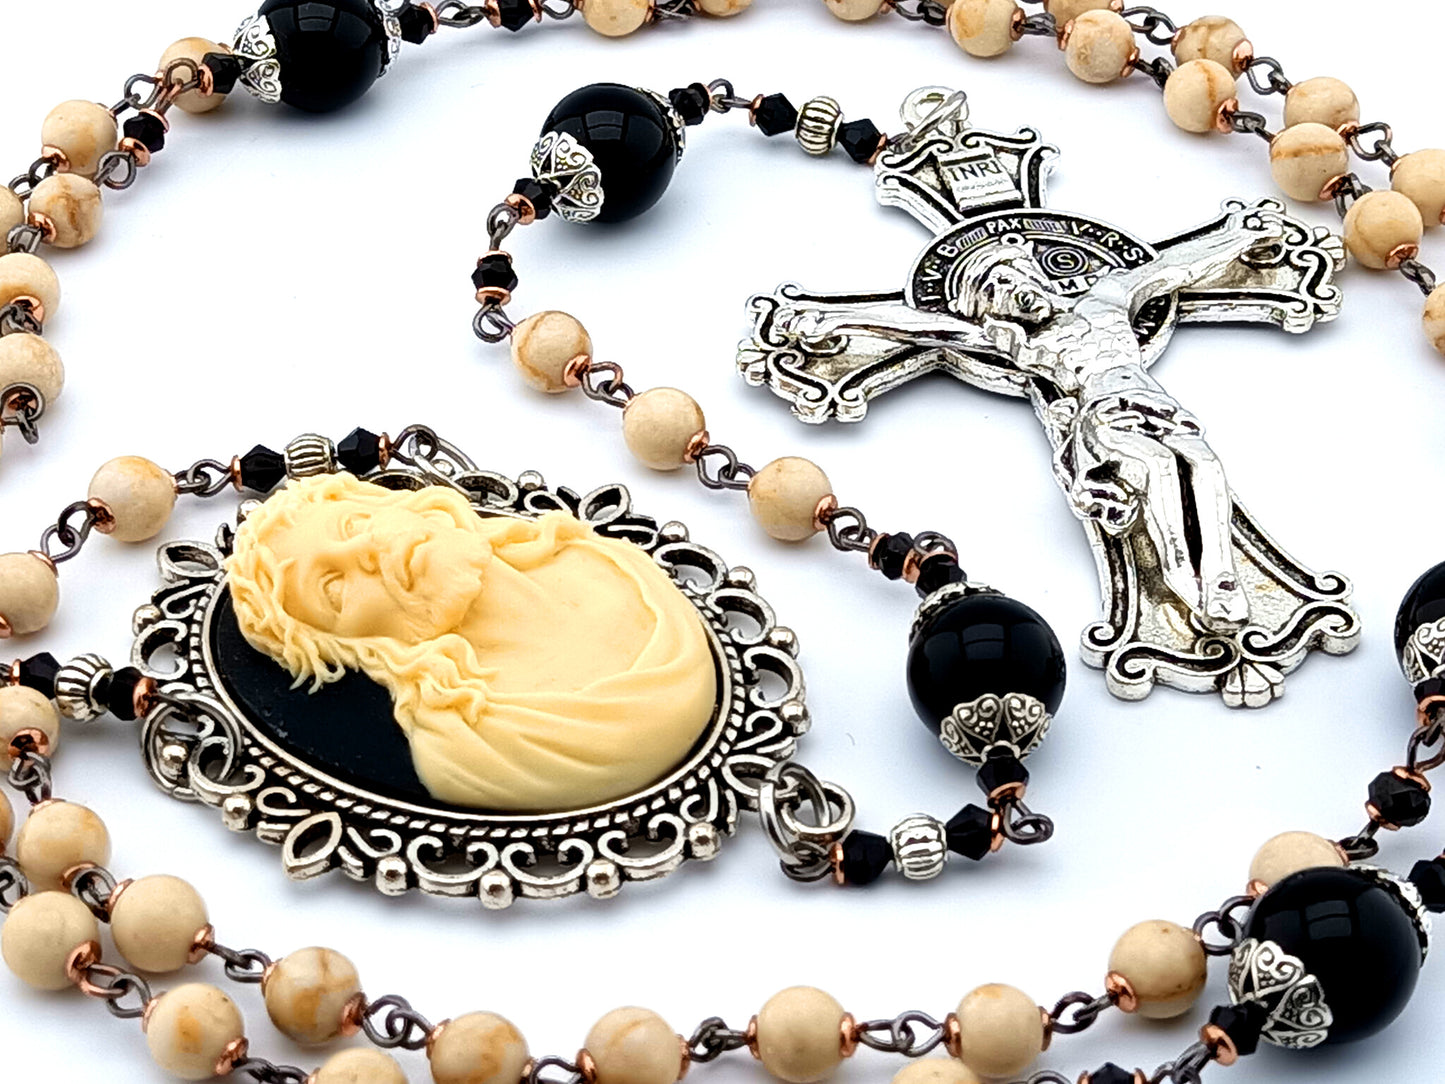 Ecce Home cameo unique rosary beads with jasper and onyx gemstone beads and Saint Benedict crucifix.